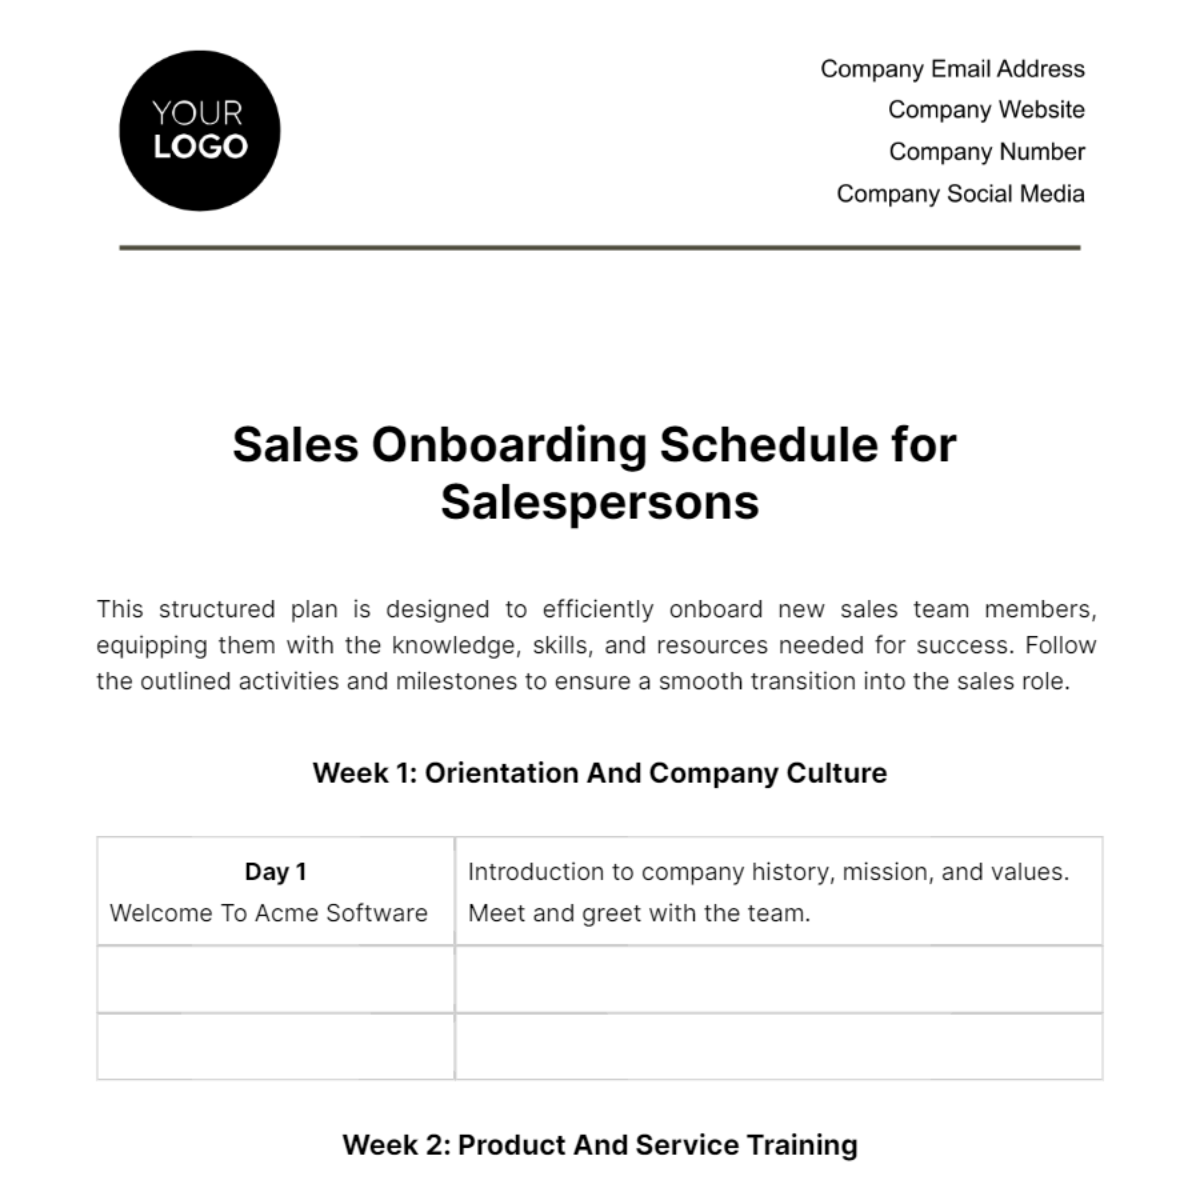 Free Sales Onboarding Schedule for Salespersons Template